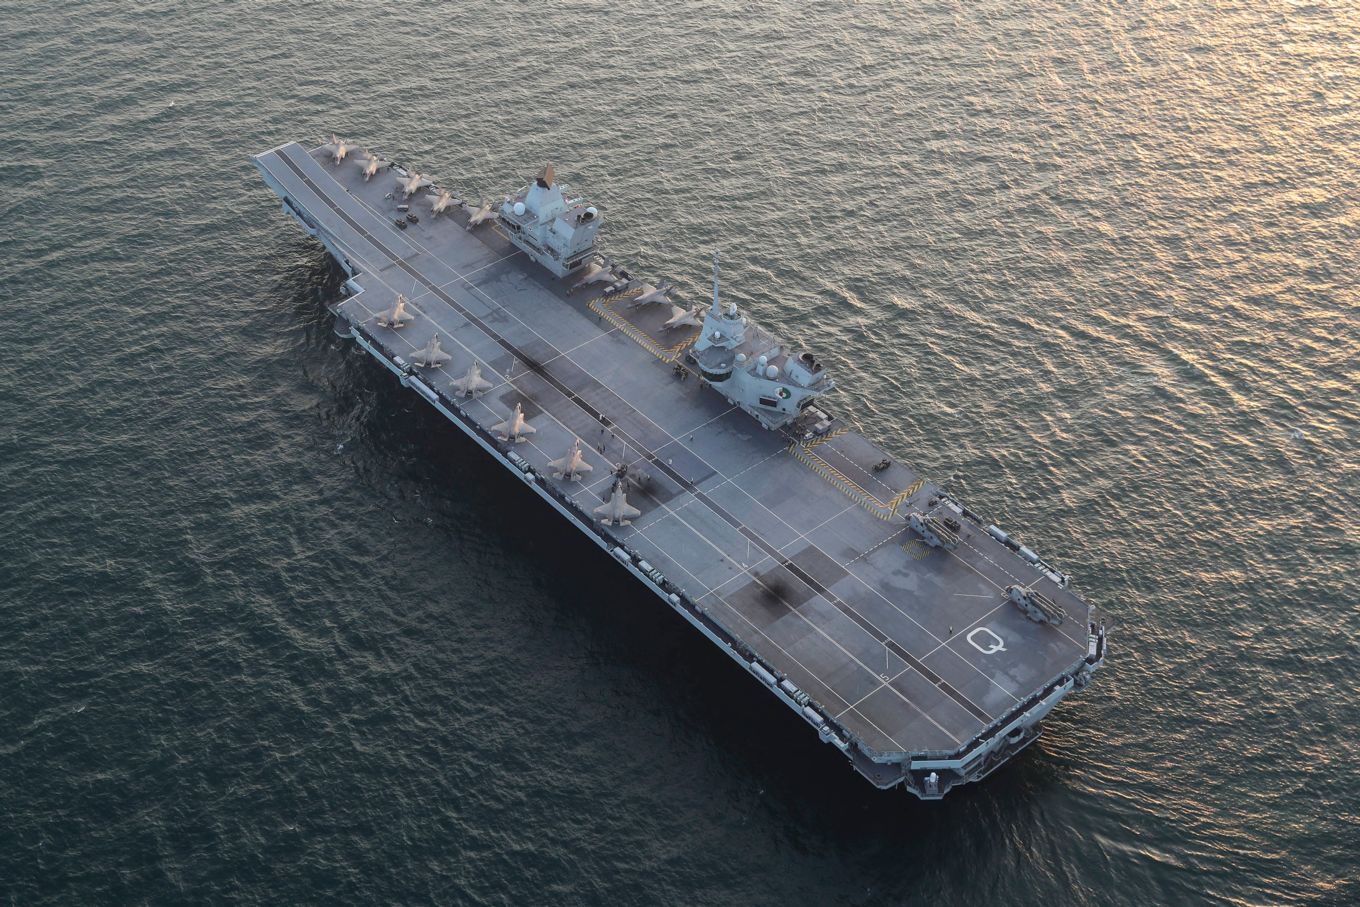 Image shows the aircraft carrier from above.